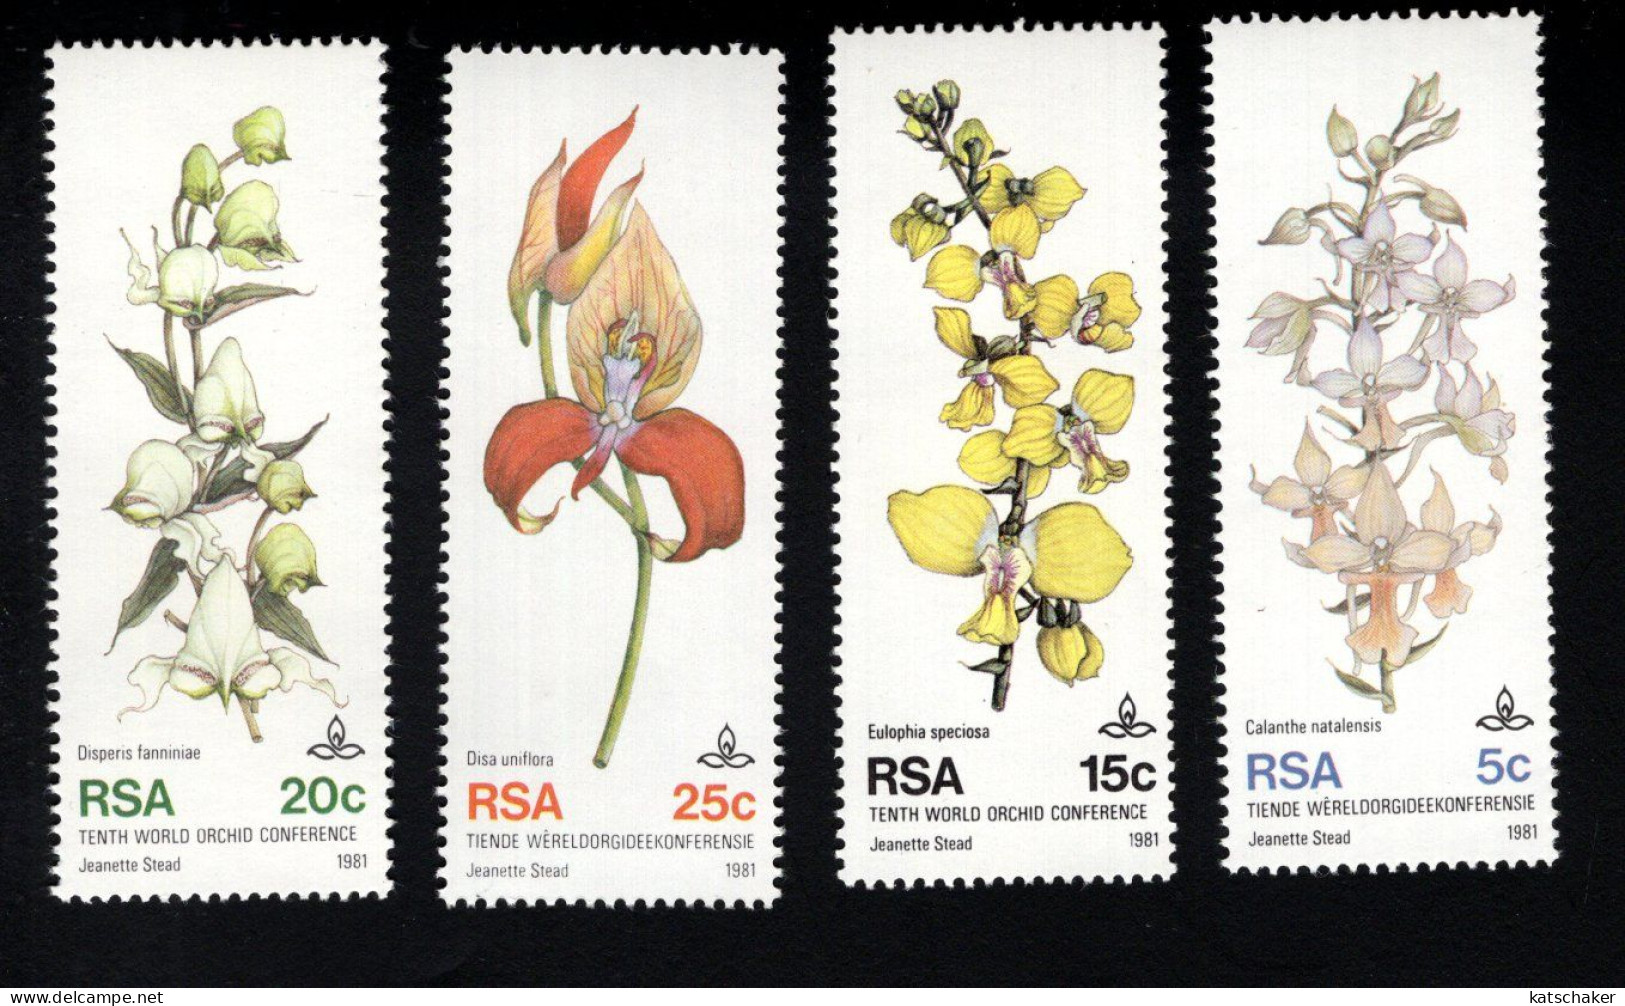 2031900350 1981 SCOTT 553 556 (XX)  POSTFRIS MINT NEVER HINGED - 10TH WORLD ORCHID CONF. - DURBAN - FLORA - ORCHIDS - Unused Stamps